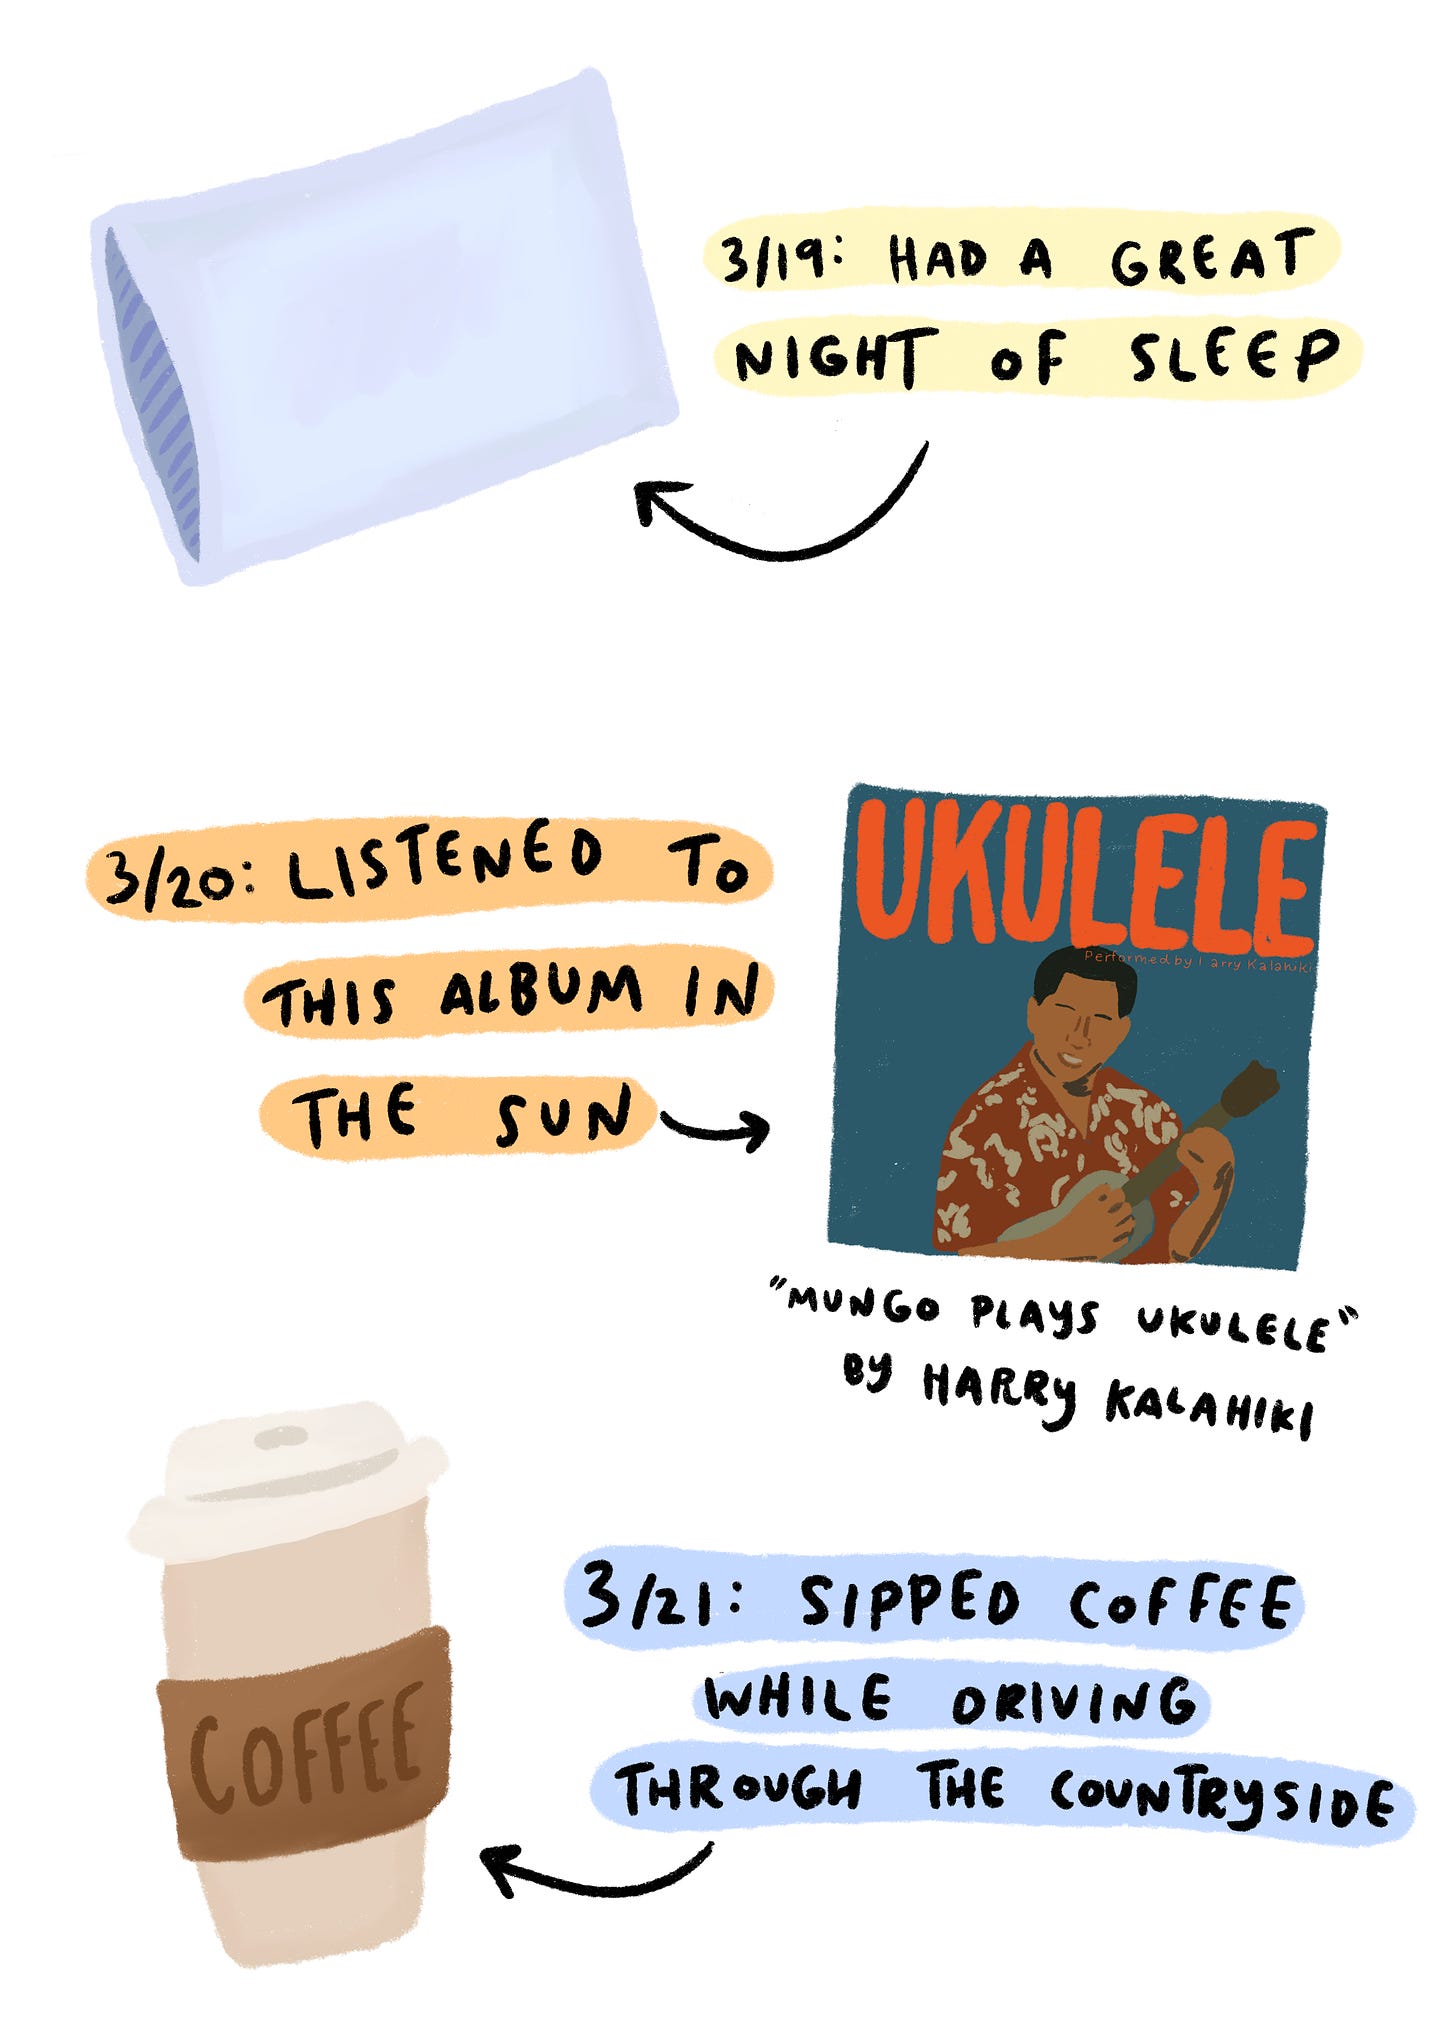 Illustration of pillow, an album, and a coffee cup